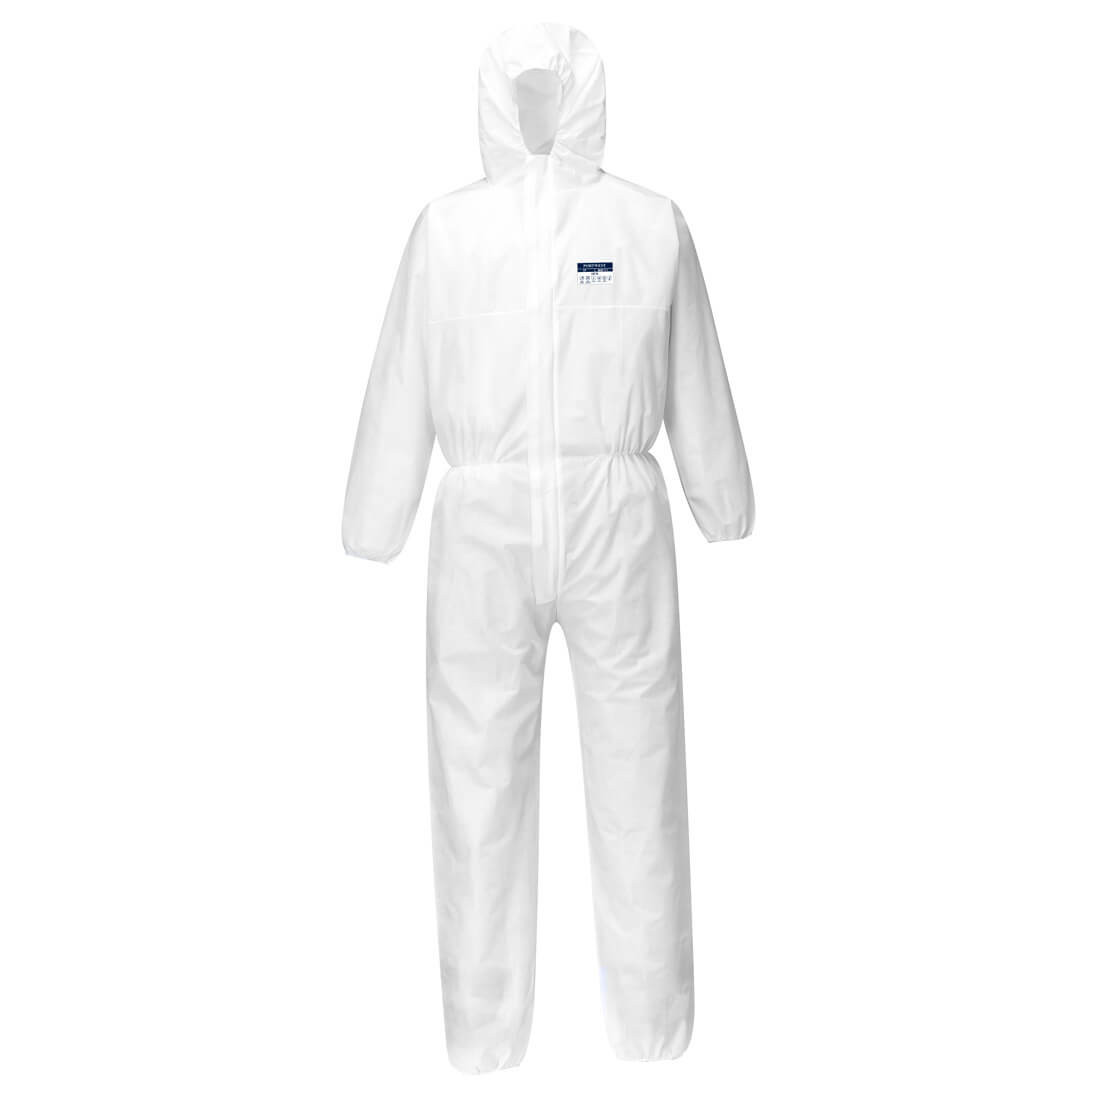 BizTex® SMS 5/6 FR Coverall - Personal protection